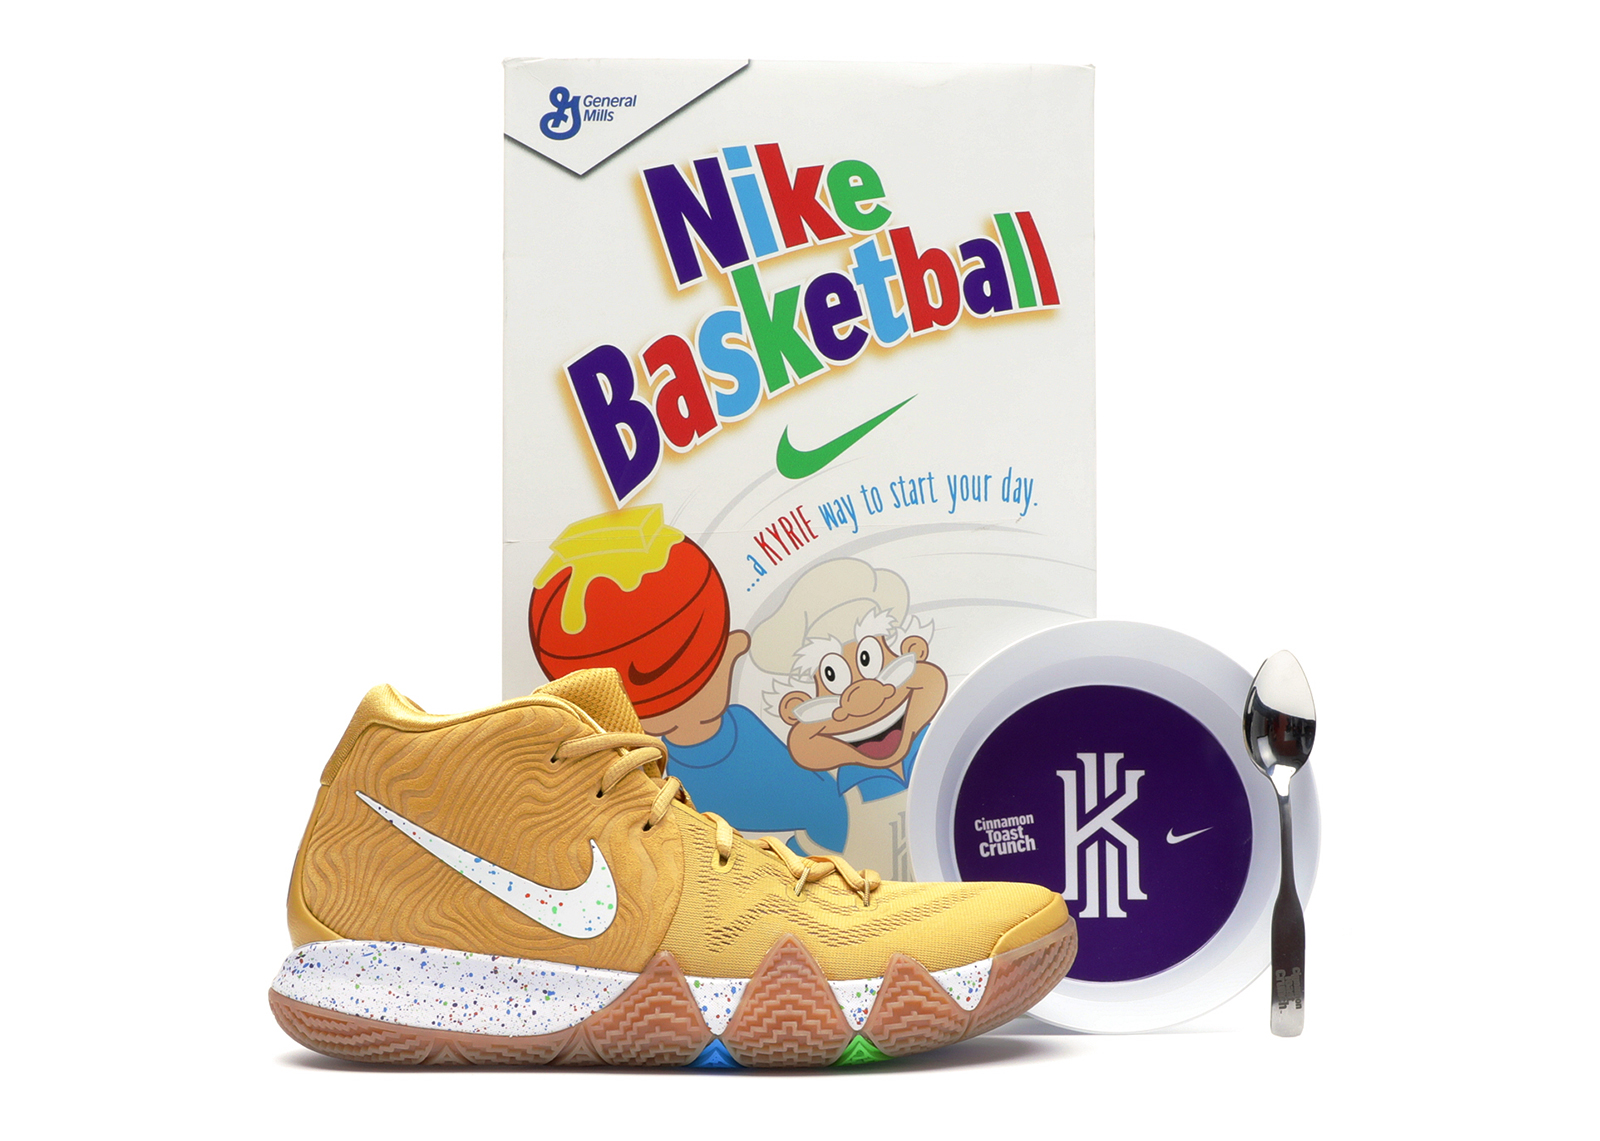 kyrie 1 cereal